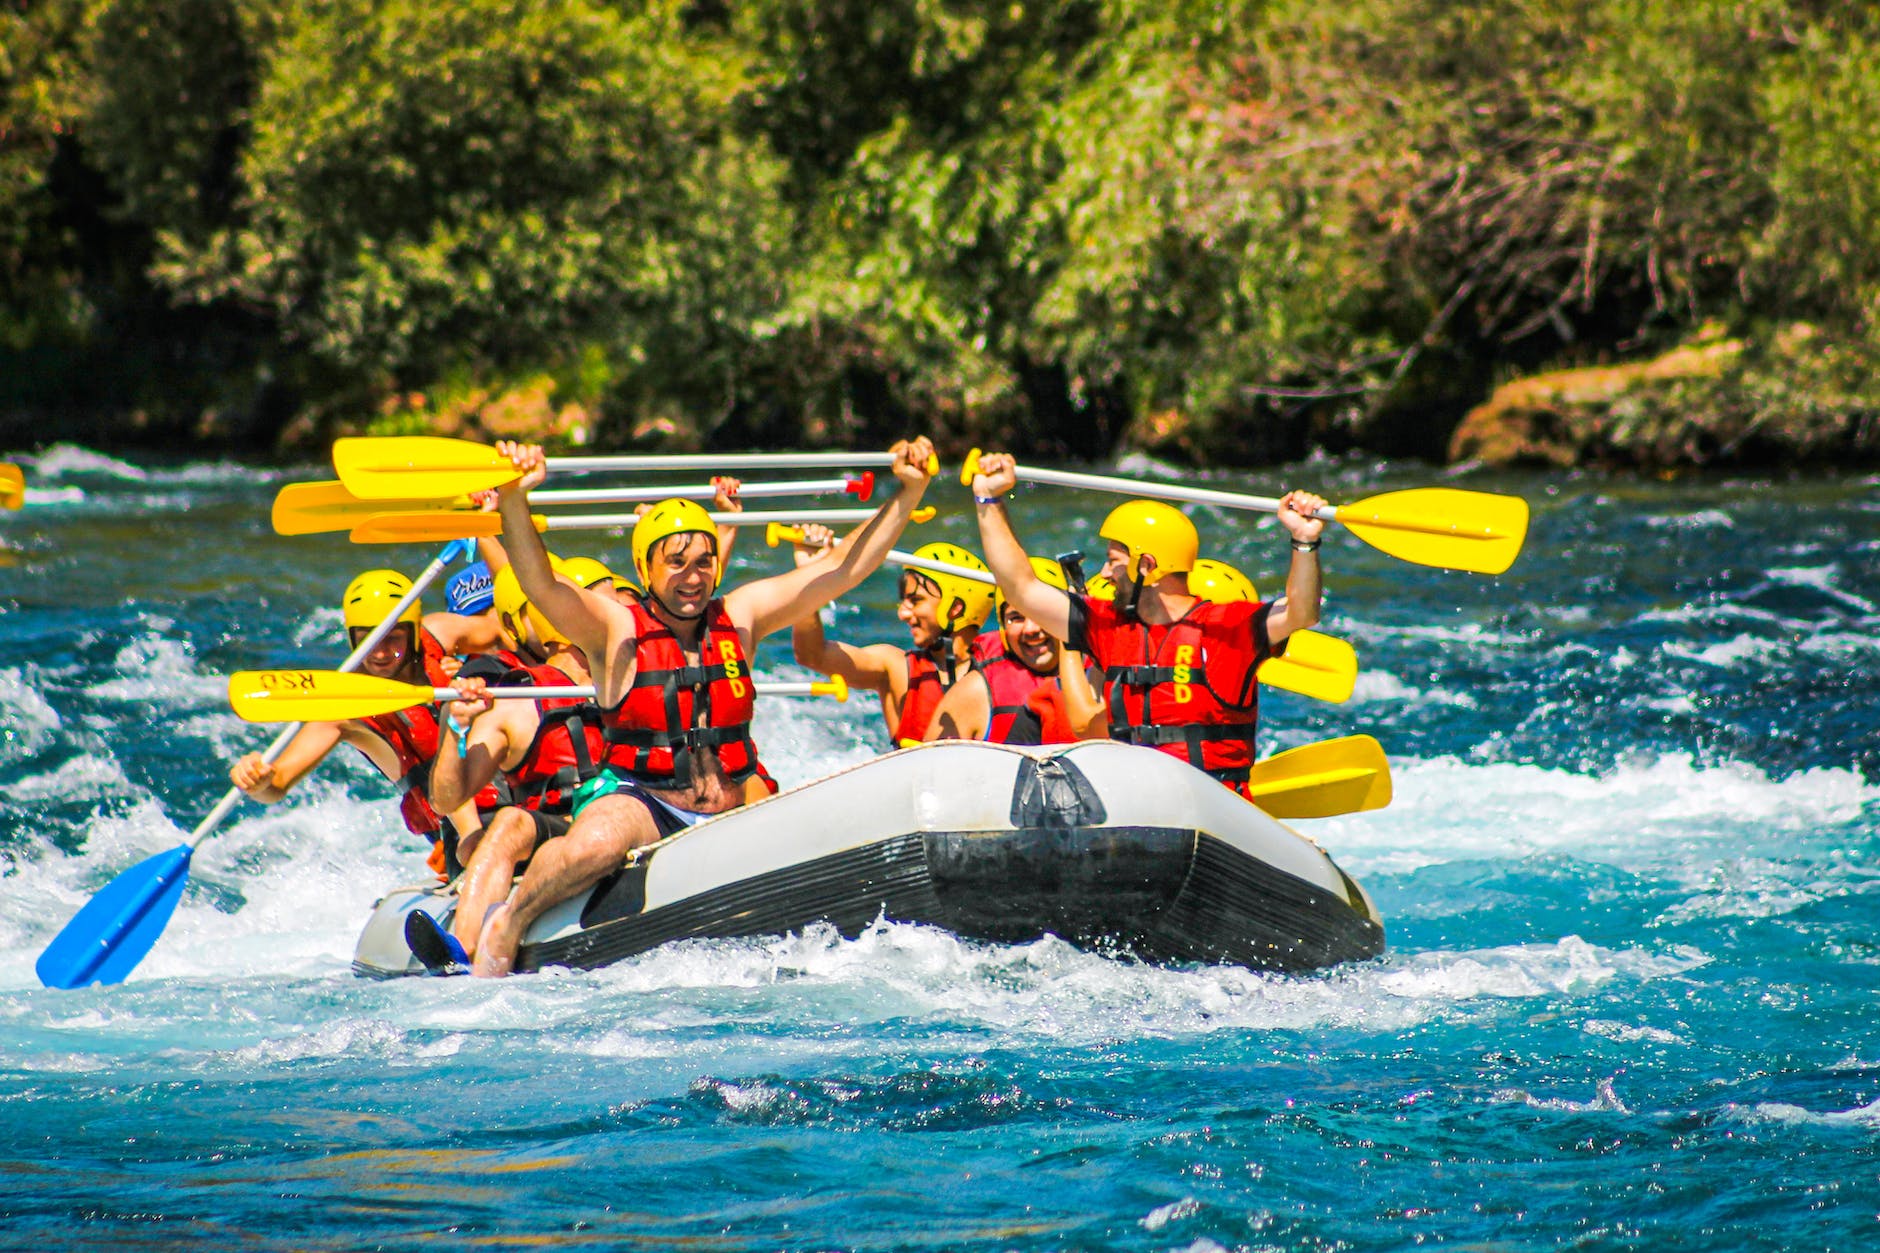 people riding on inflatable raft